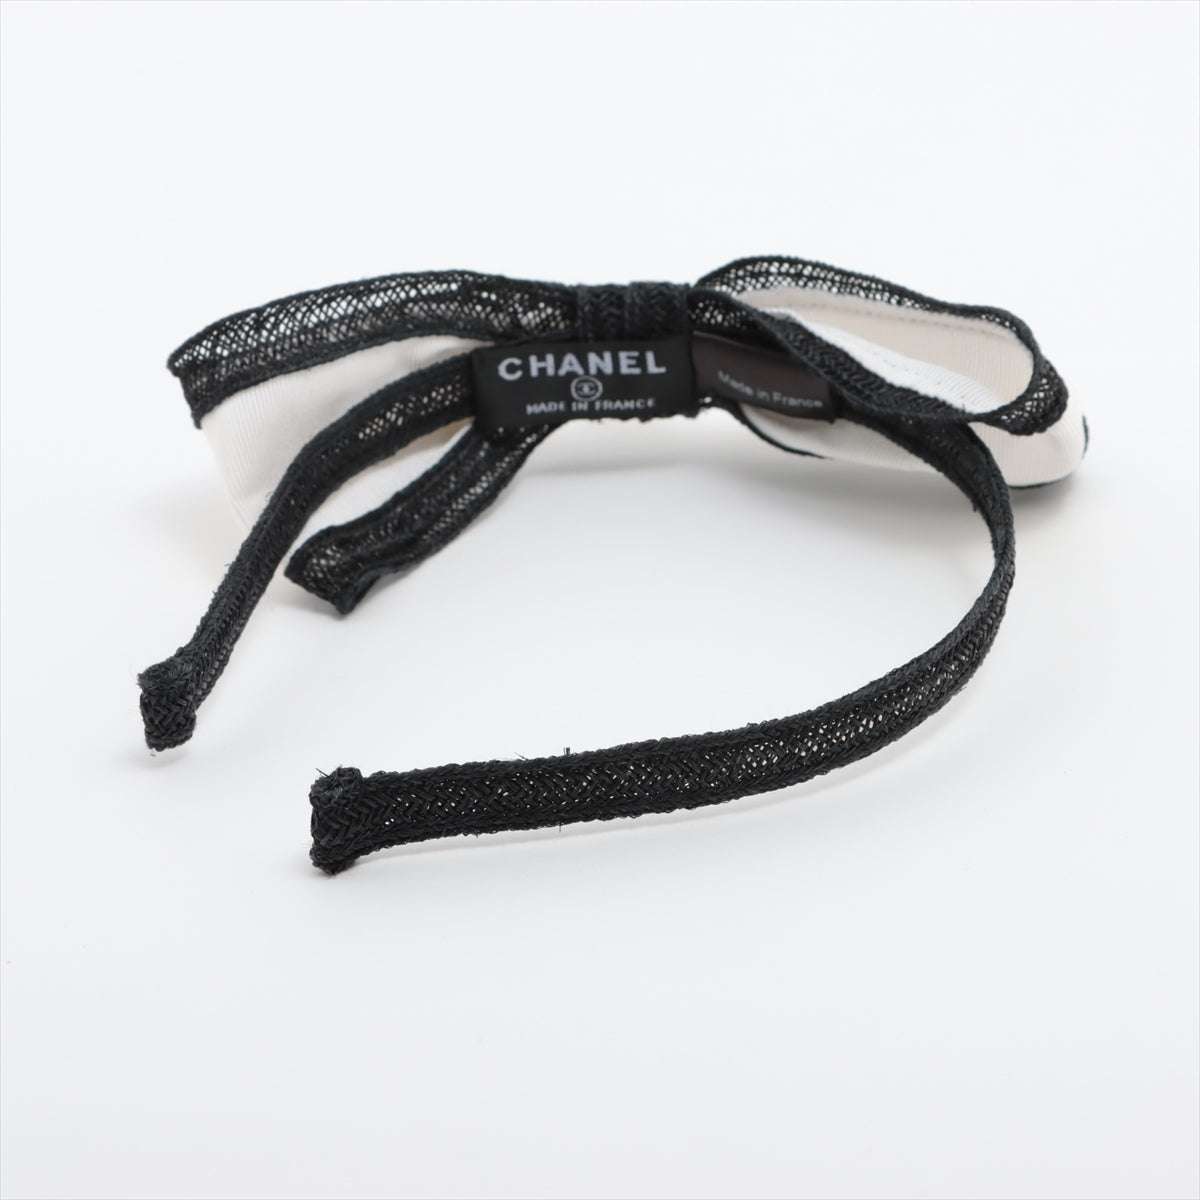 Chanel Coco Mark Headband Straw Black × White Wears Stained Lint on fabric Bow Motif